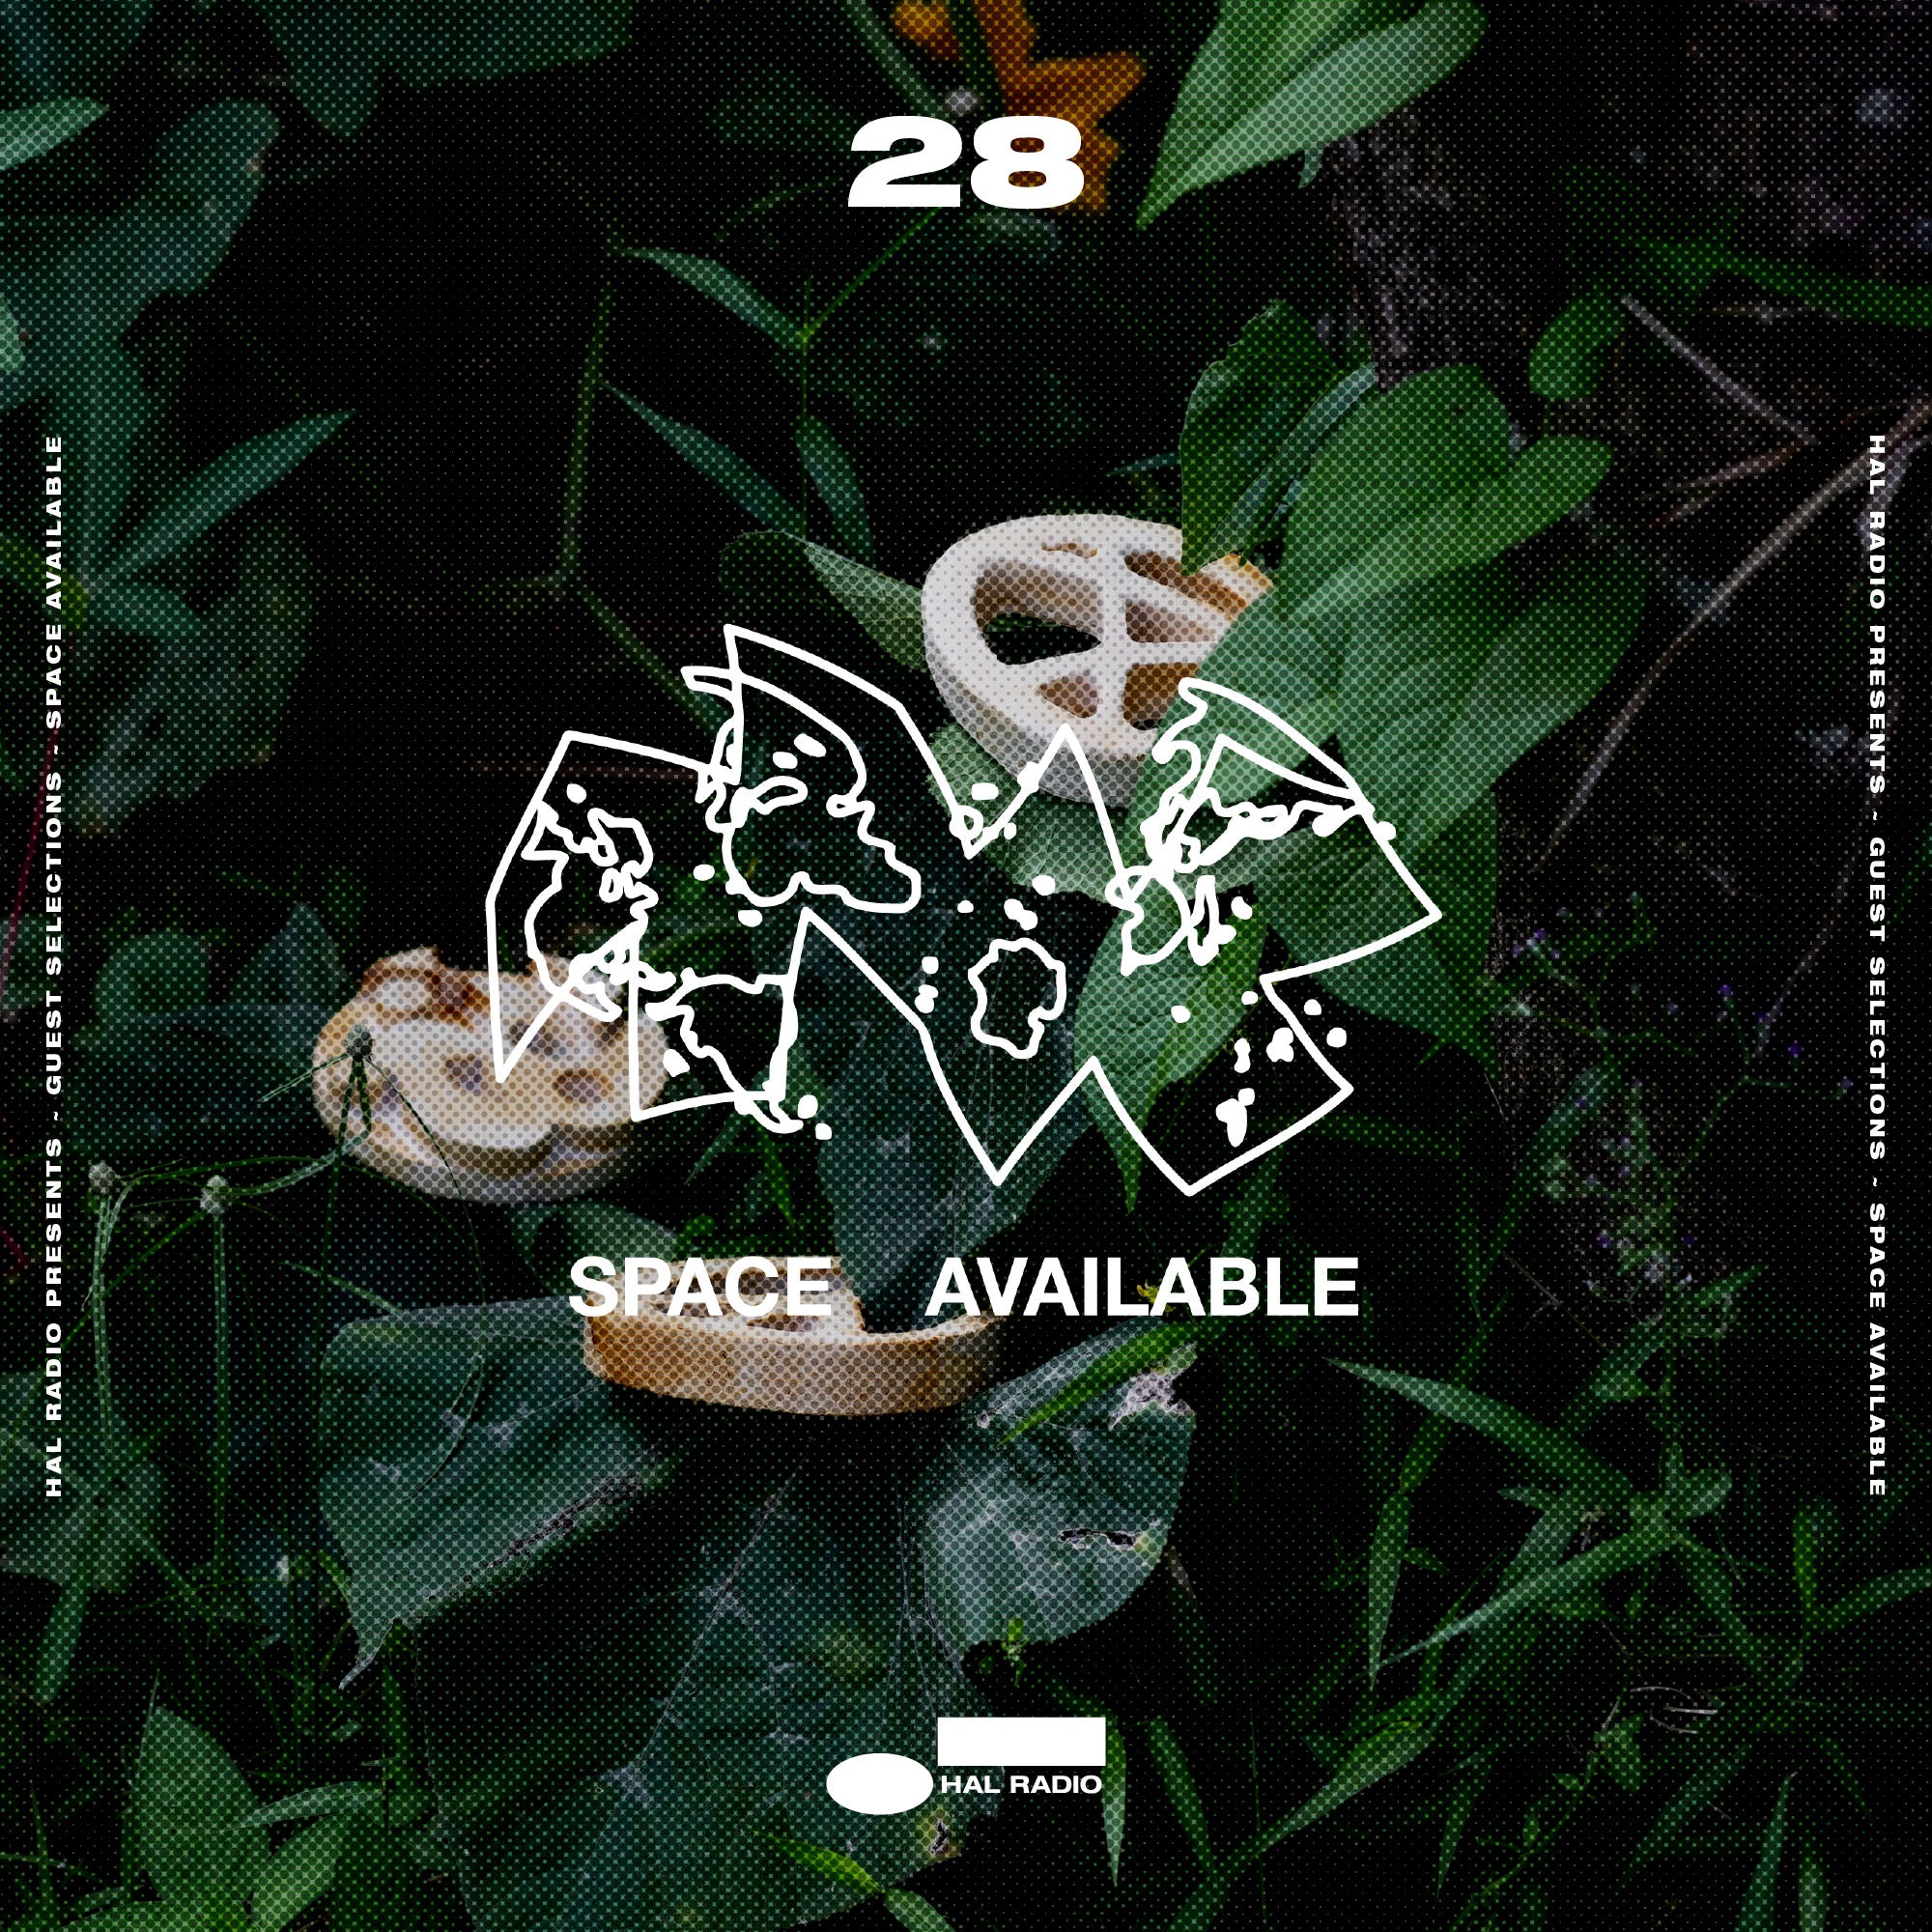 HAL RADIO | EPISODE 28* | SPACE AVAILABLE